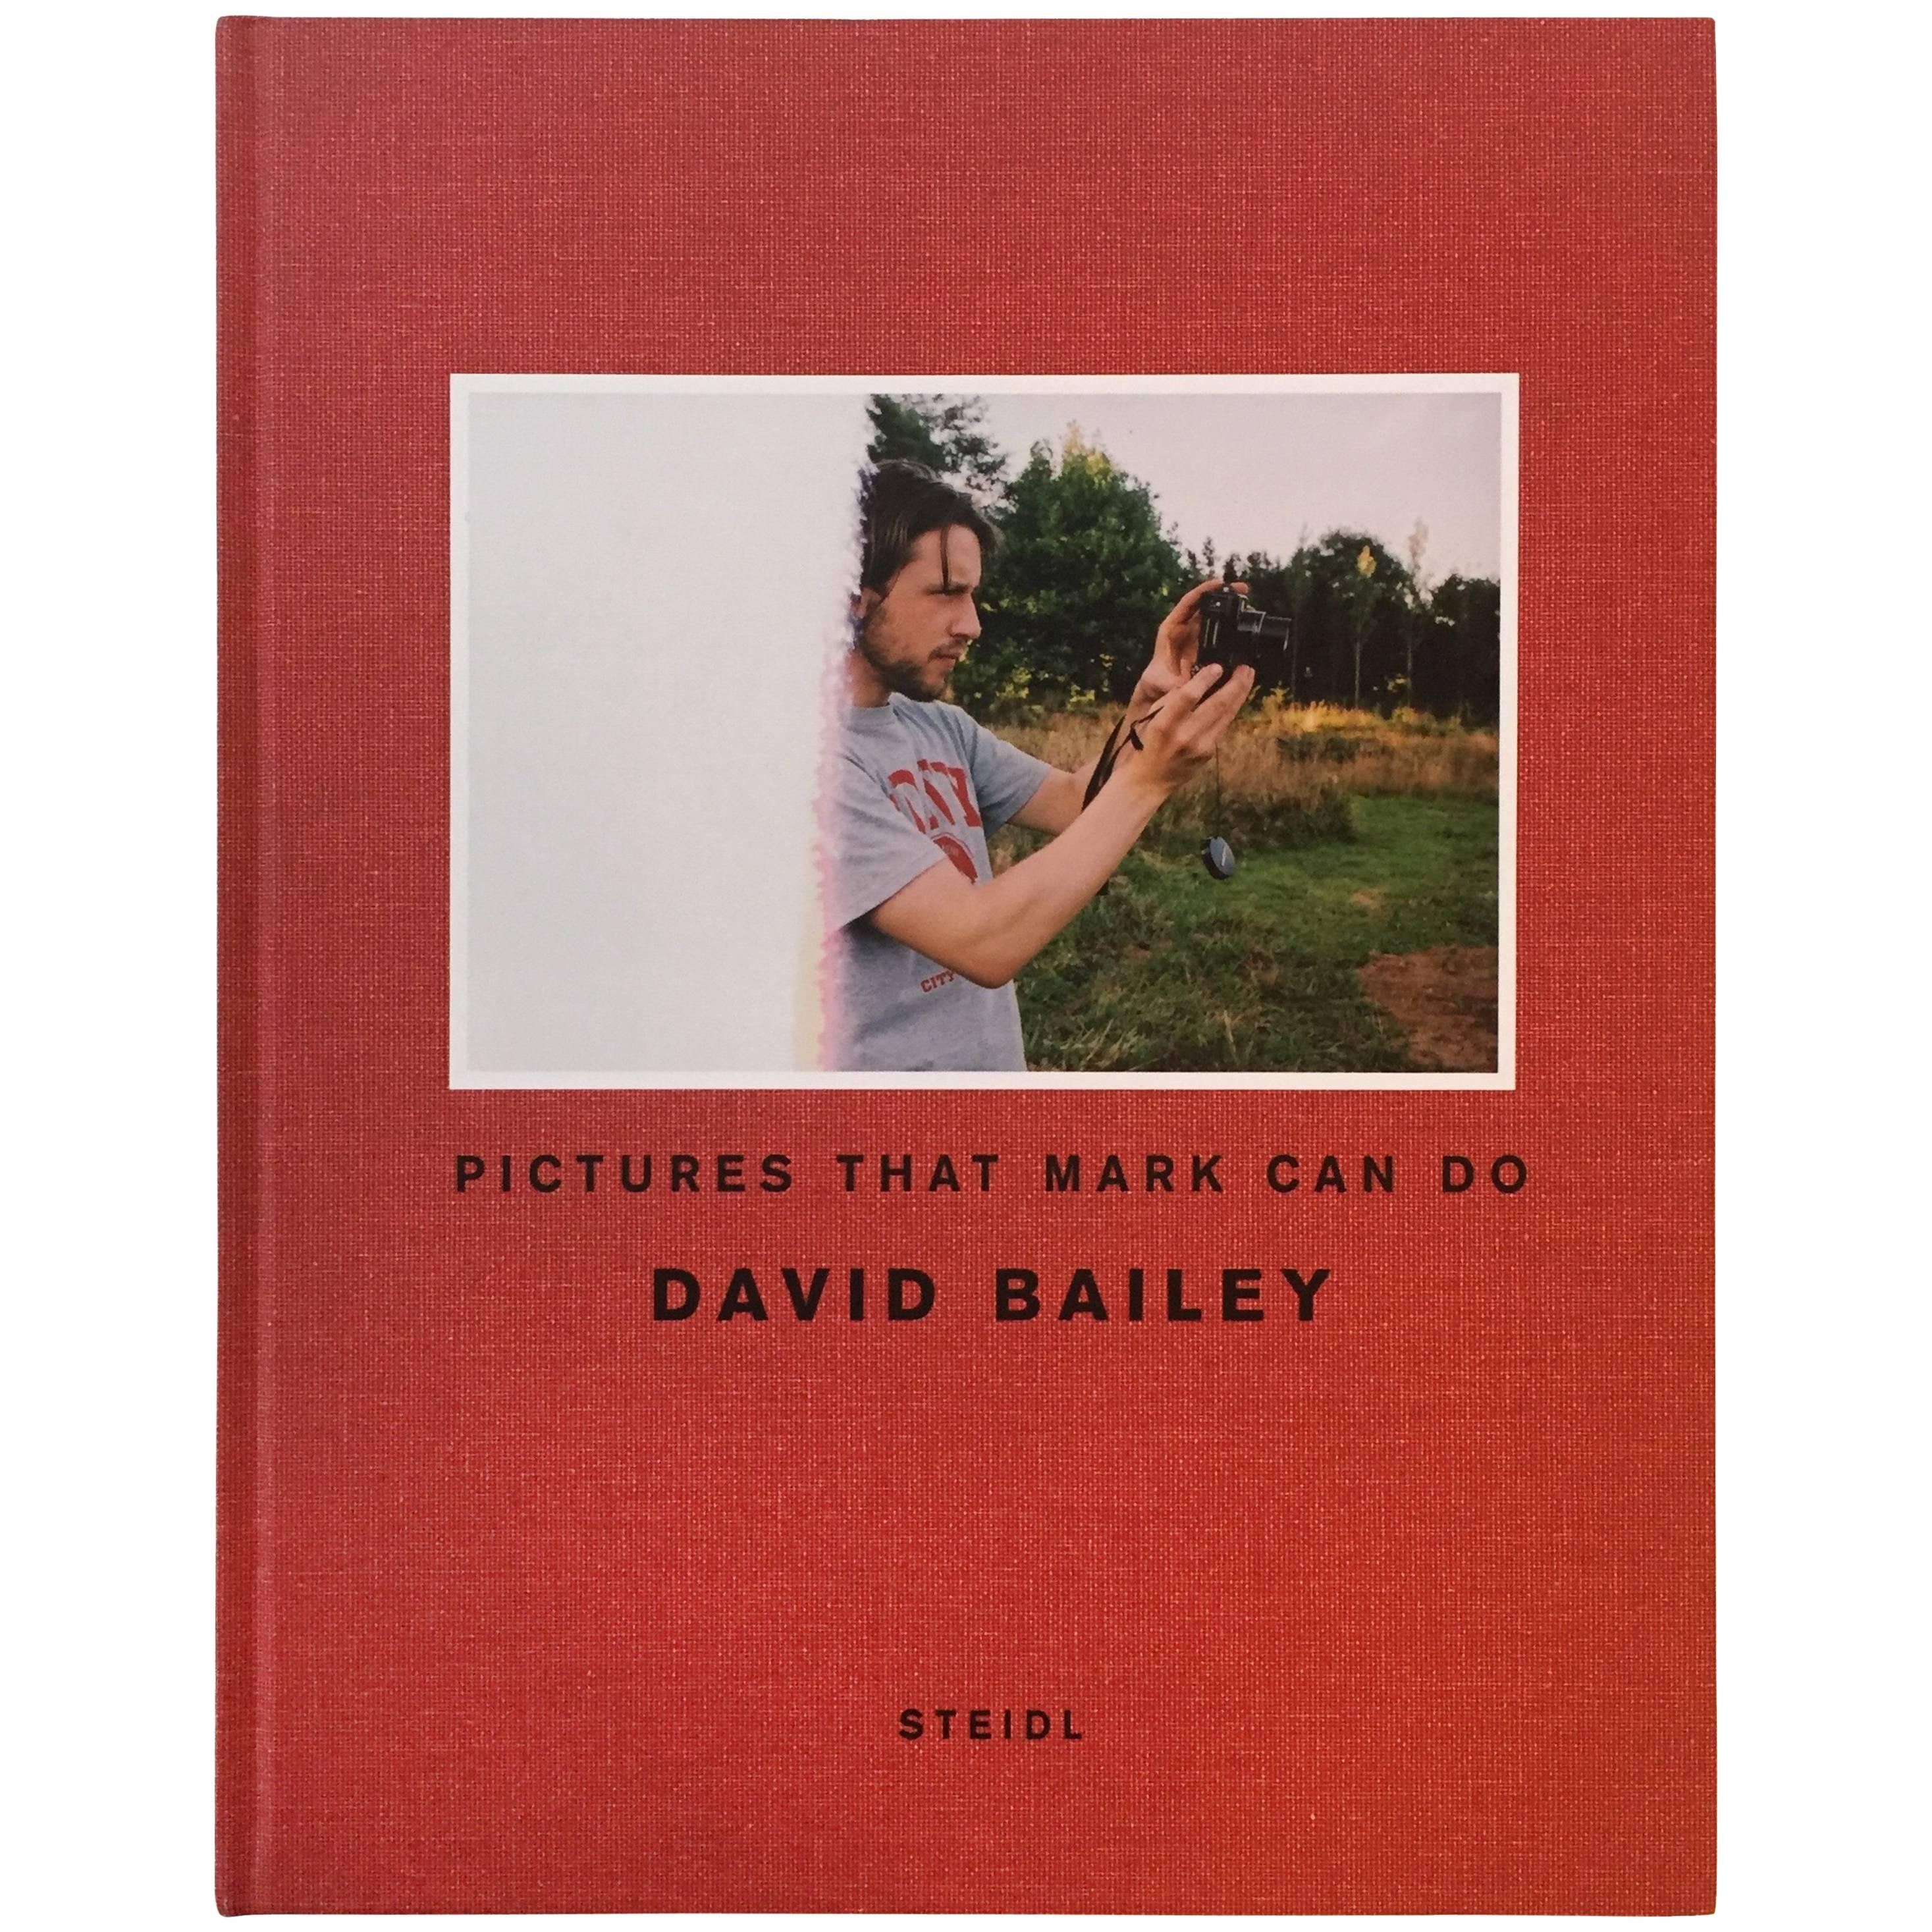 Pictures That Mark Can Do - David Bailey - Signed 1st Edition, Steidl, 2007 For Sale